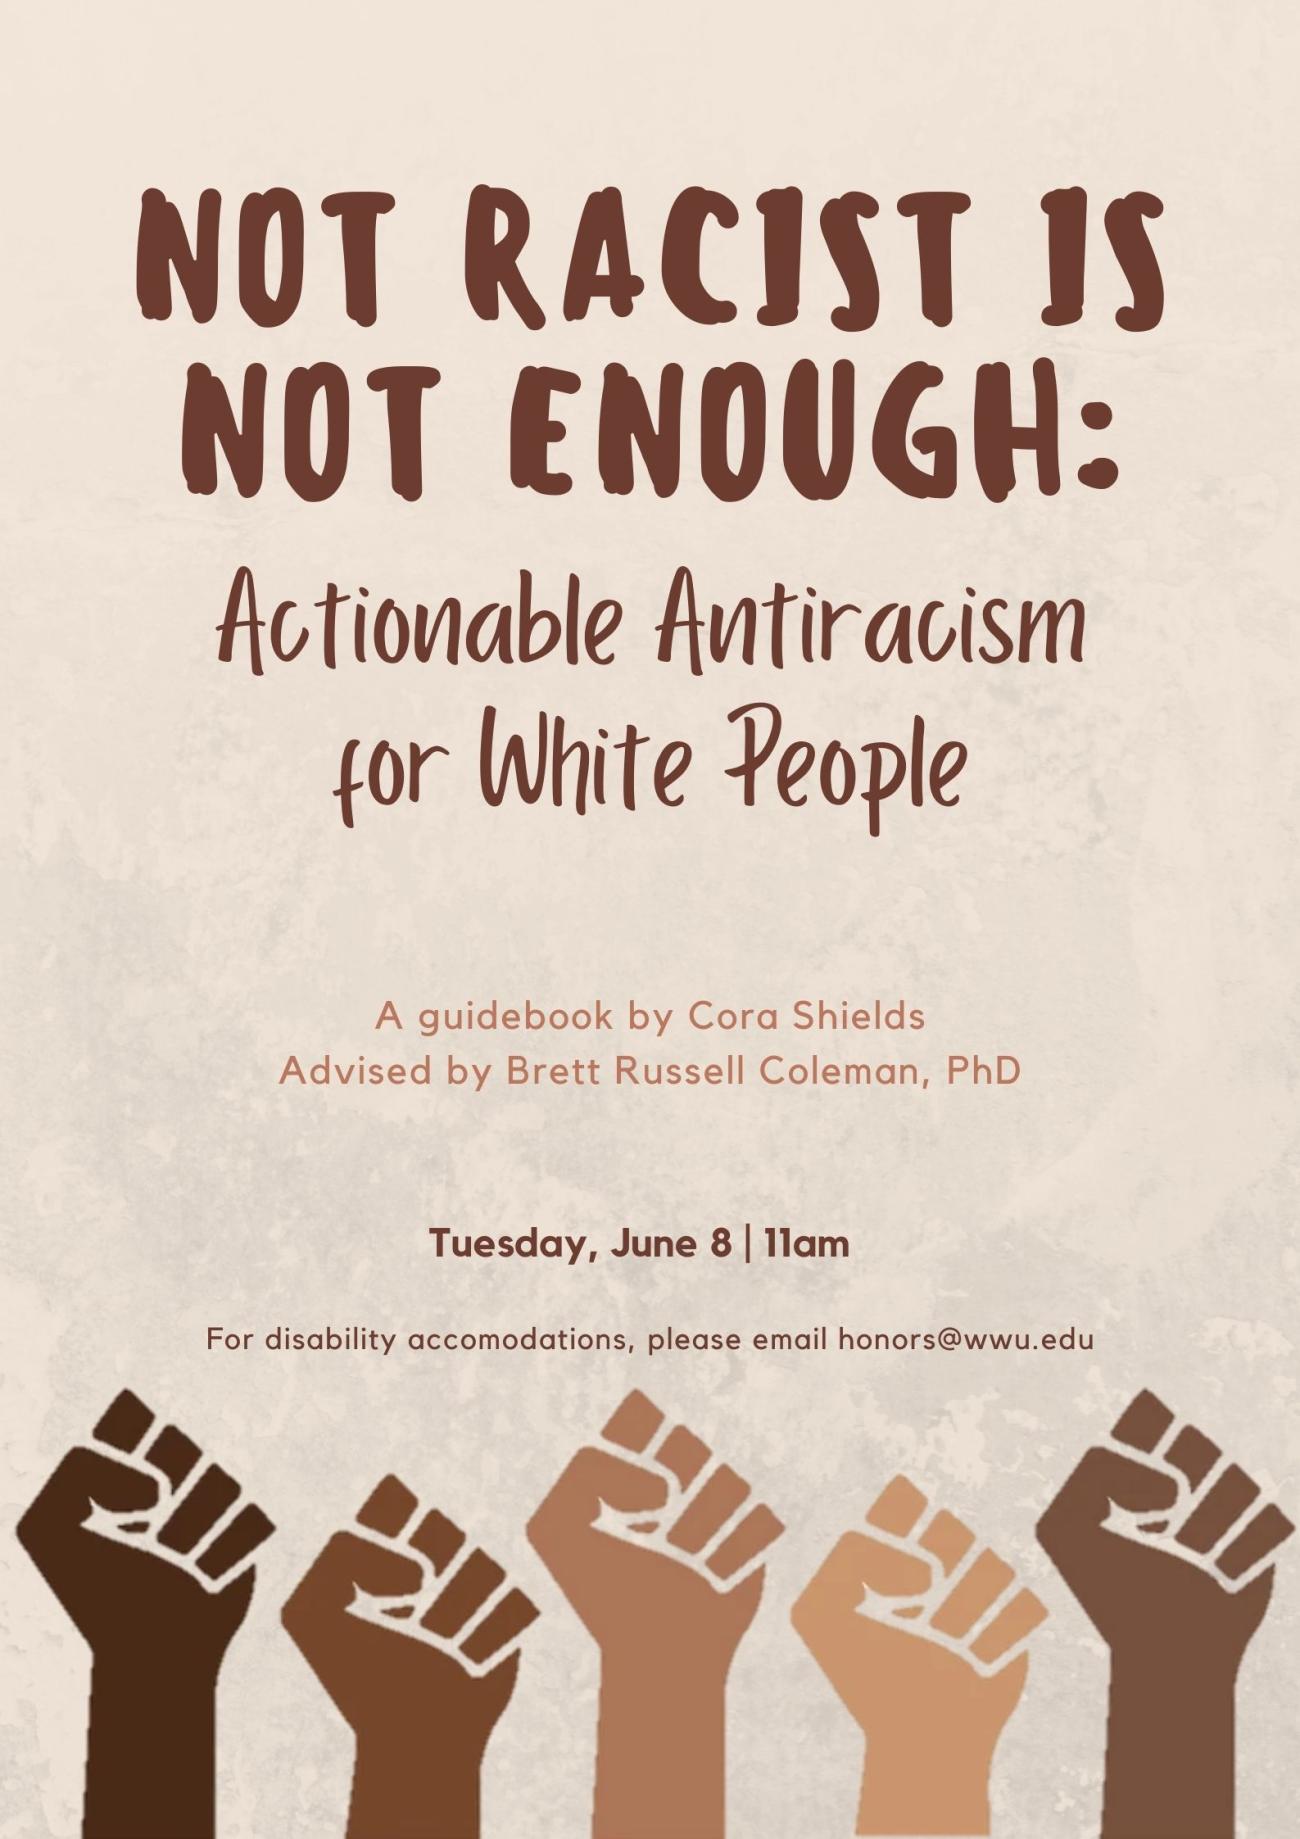 Clip art of five raised fists in a variety of skin tones. Above the fists, text reads: "NOT RACIST IS NOT ENOUGH: Actionable Antiracism for White People. A guidebook by Cora Shields. Advised by Brett Russel Coleman, PhD. Tuesday, June 8, 11am. For disability accommodations, please email honors@wwu.edu."